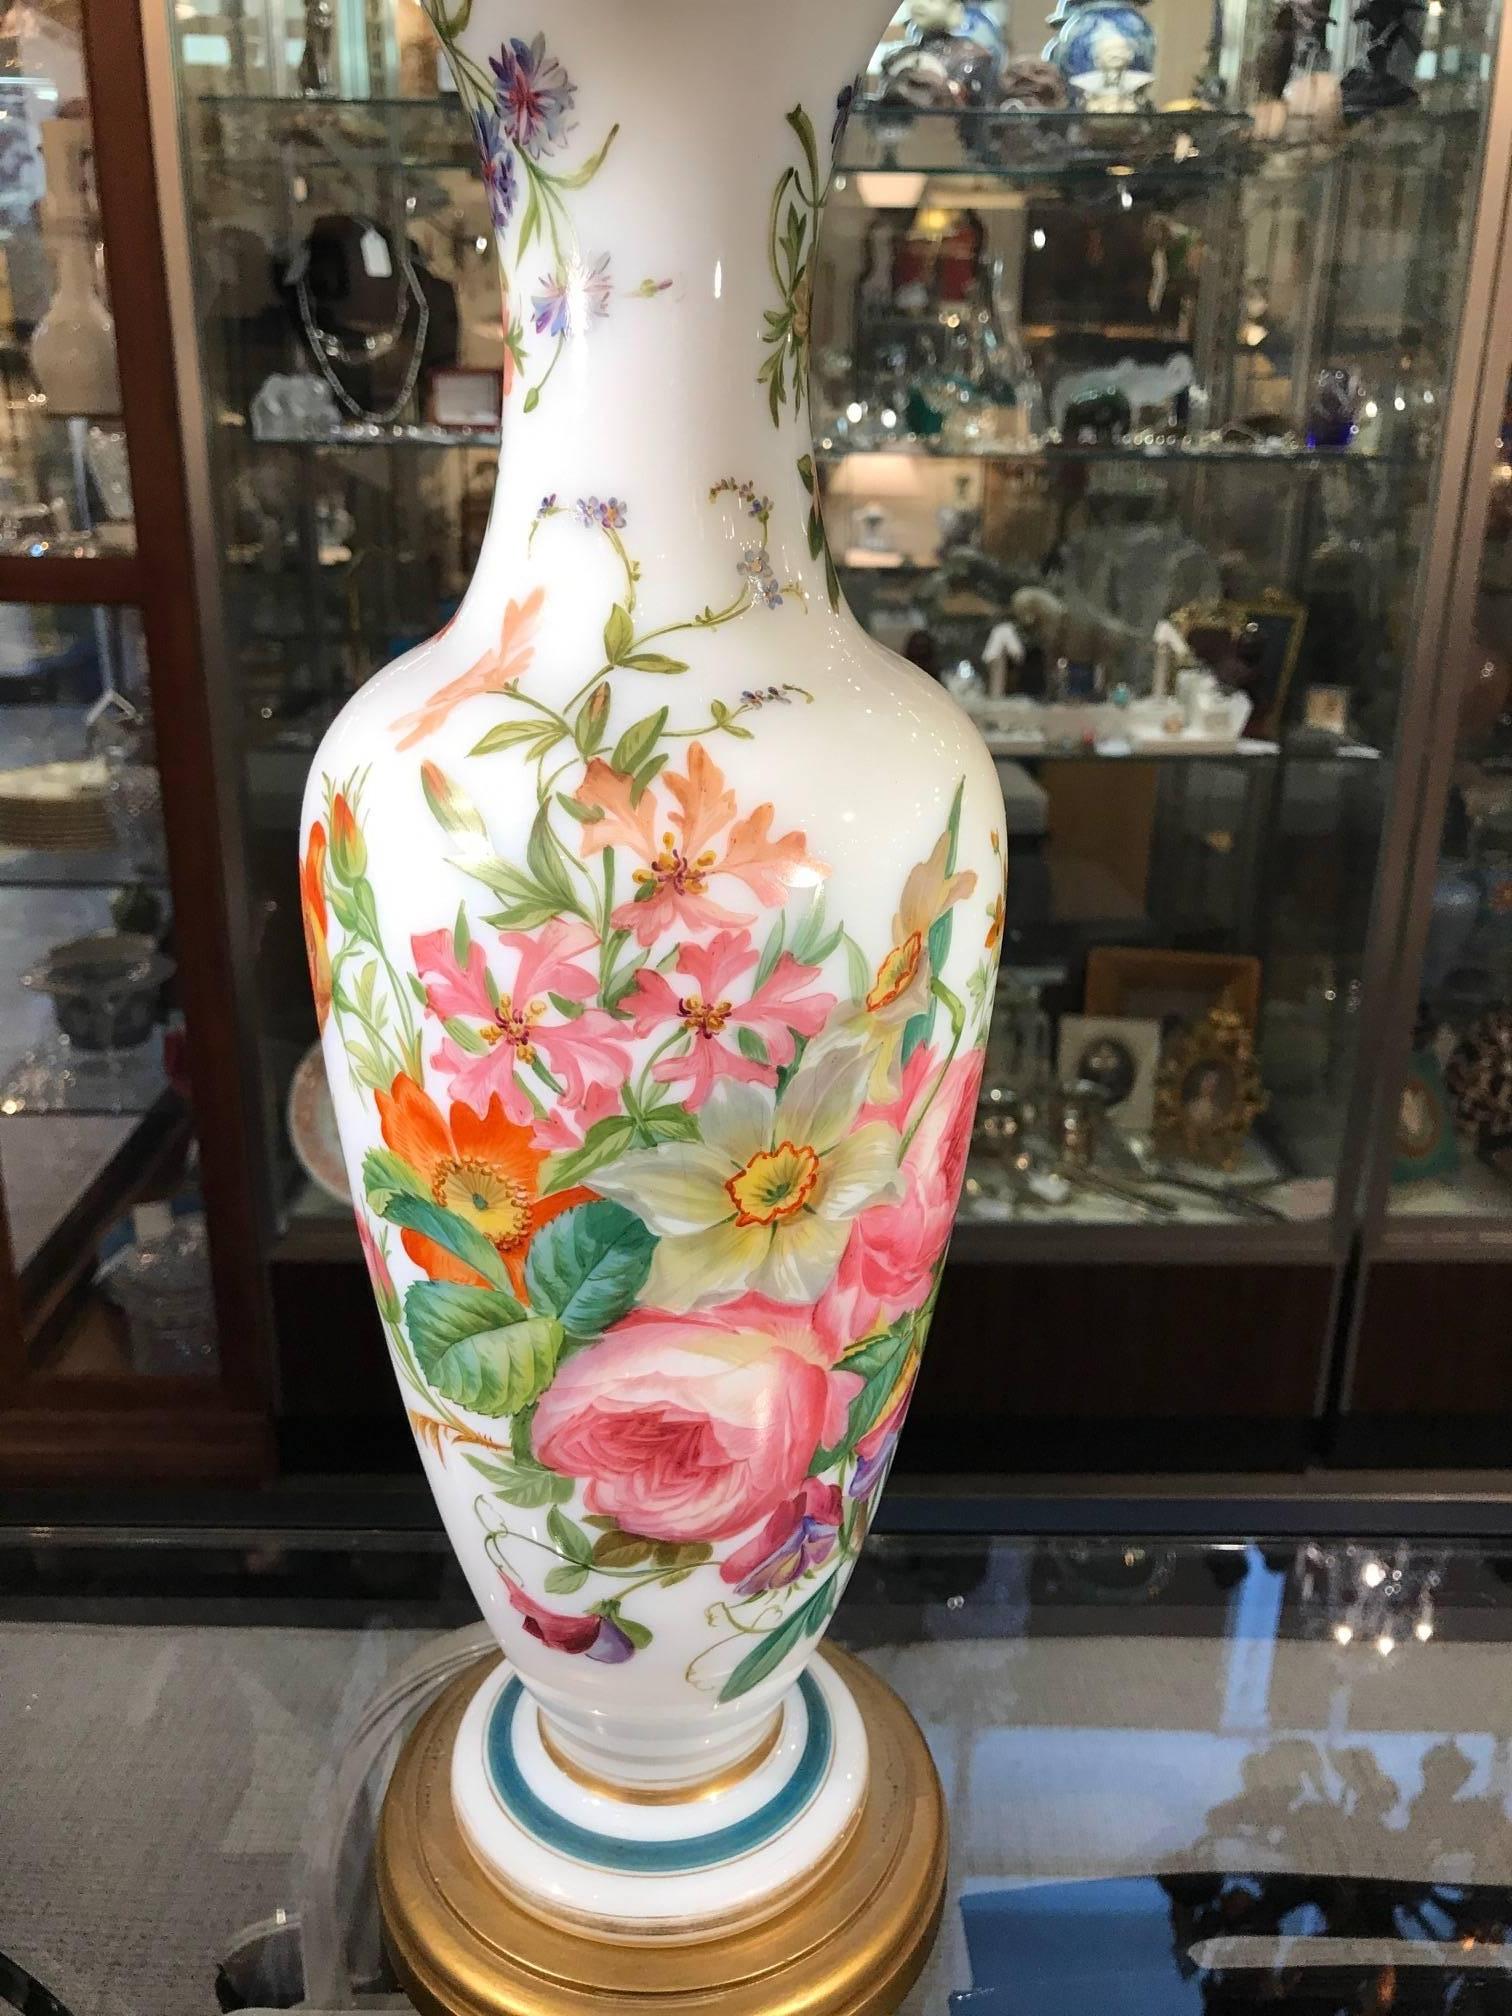 19th Century French Opaline Enamel Painted Vase Lamp by Jean-Francois Robert, Baccarat, 1840